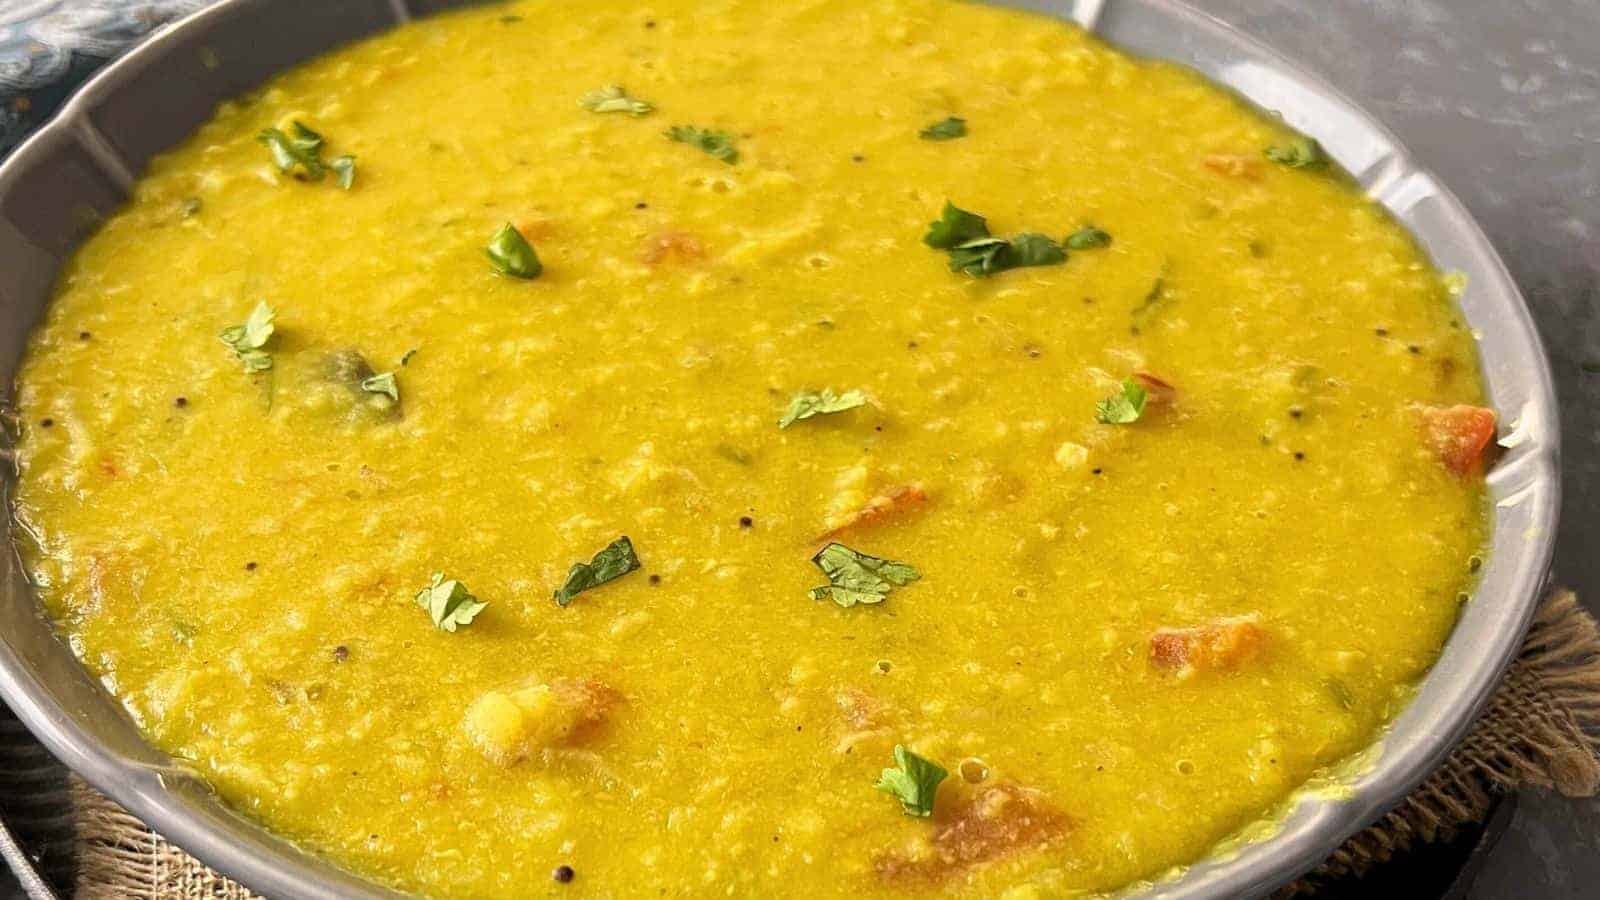 A bowl of Instant Pot Cabbage Dal garnished with cilantro on a textured surface.